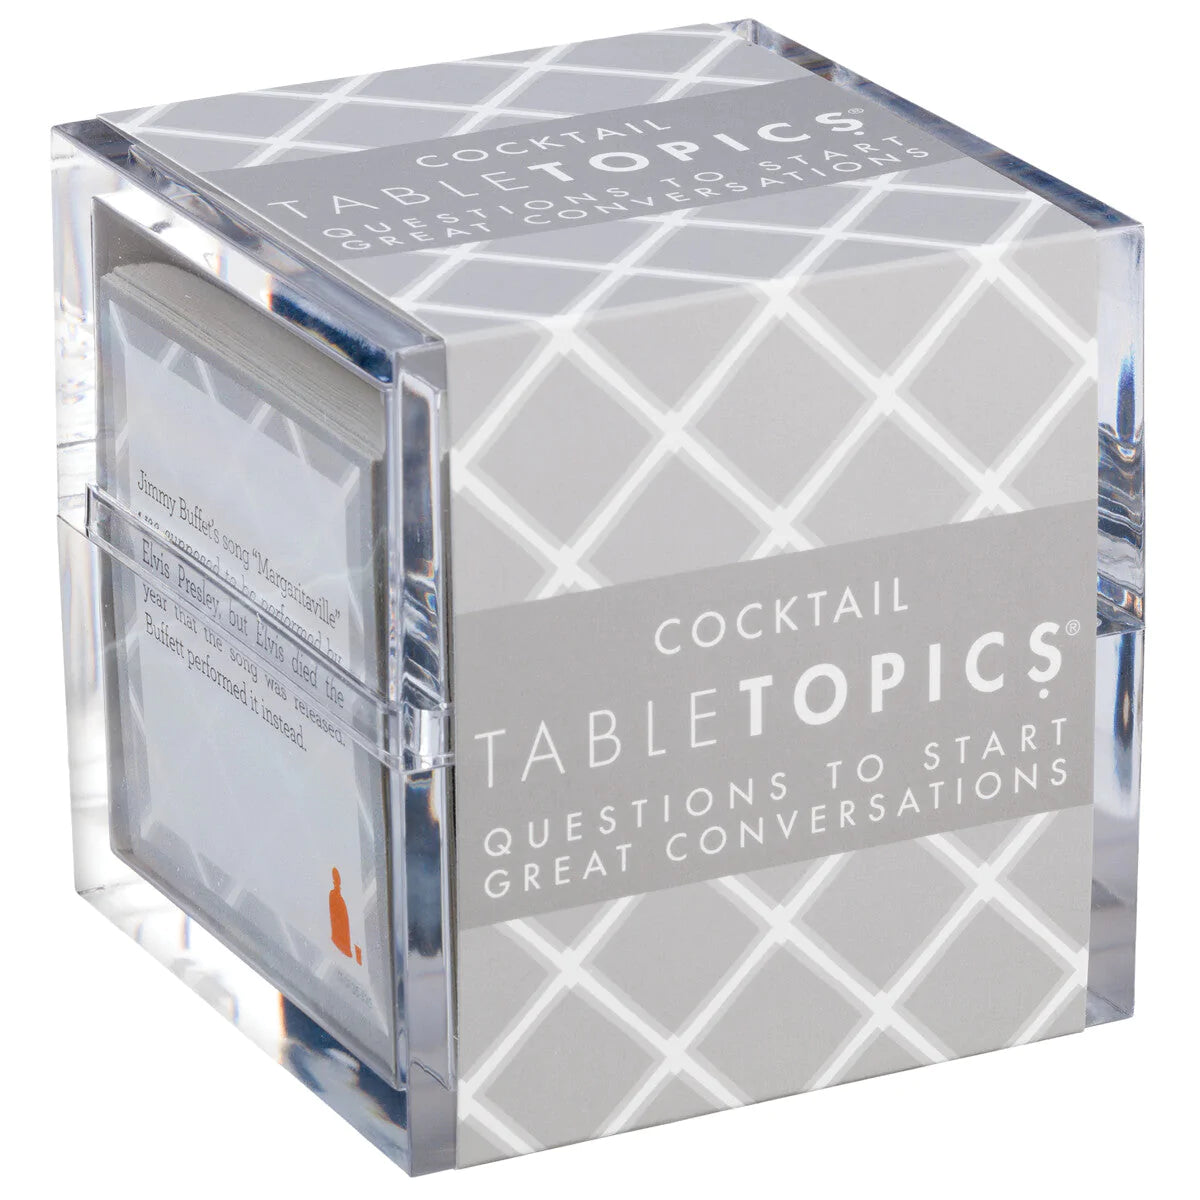 Cocktail Table Topics